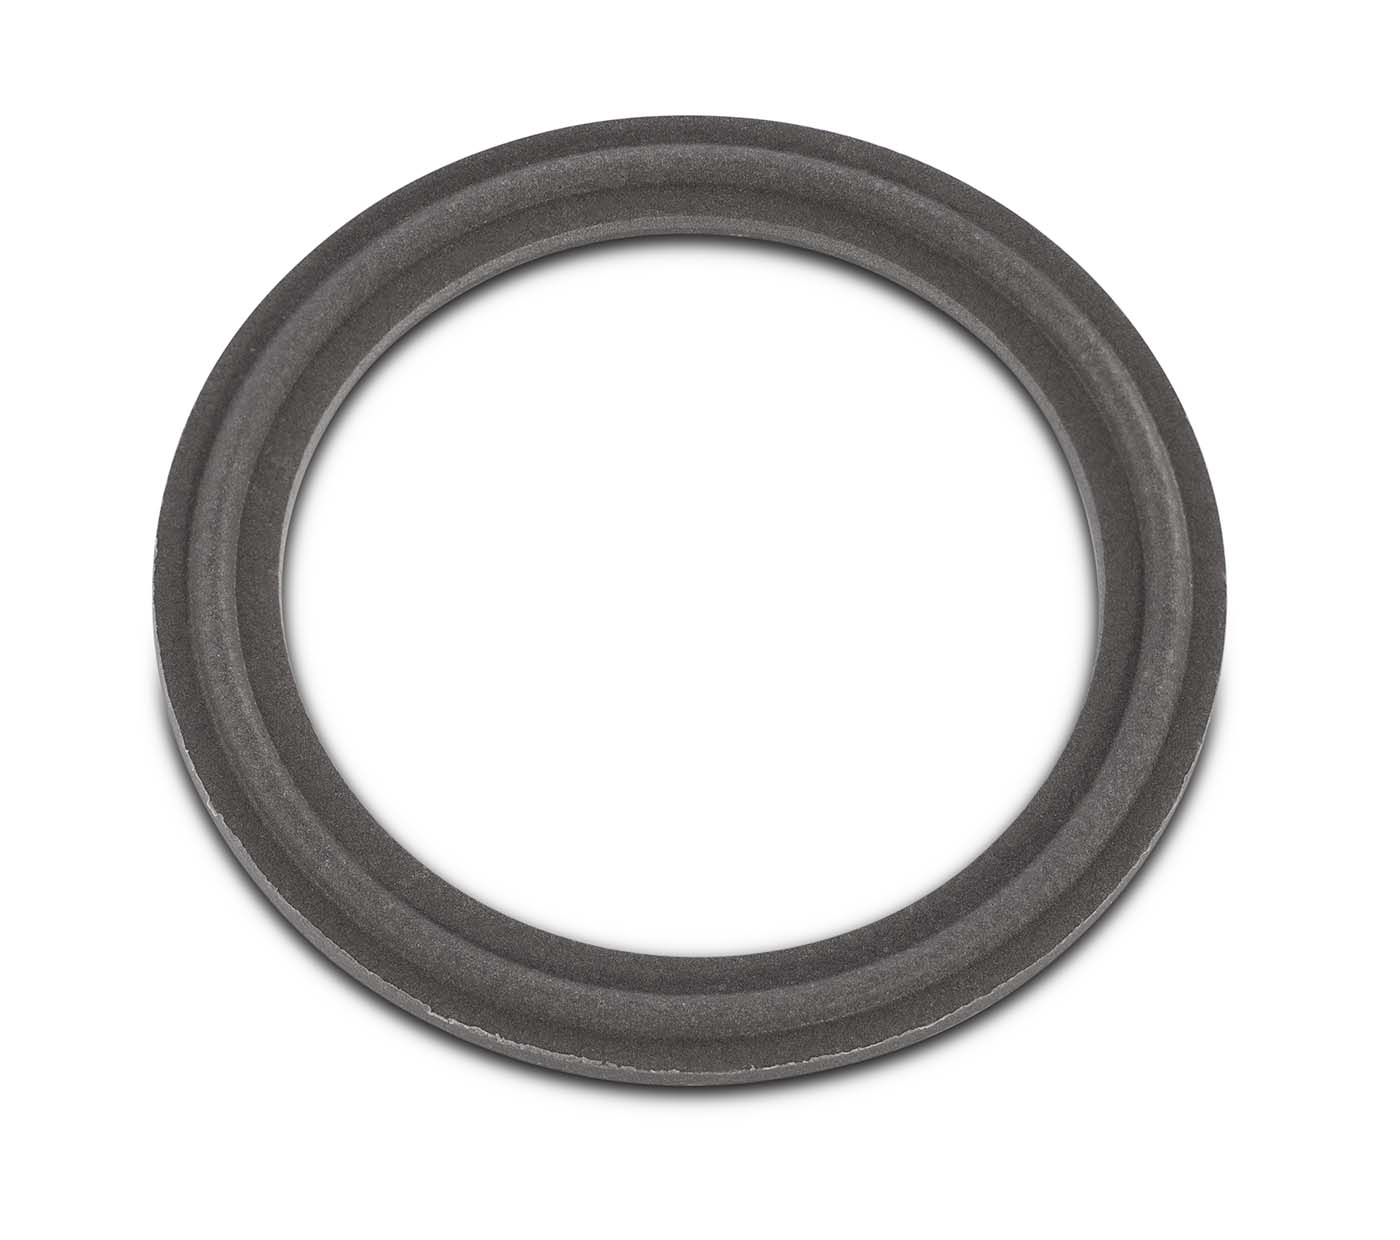 Tef-Steel PTFE / Stainless Steel Sanitary Tri-Clamp Gasket Shop All Categories BVV 2-inch